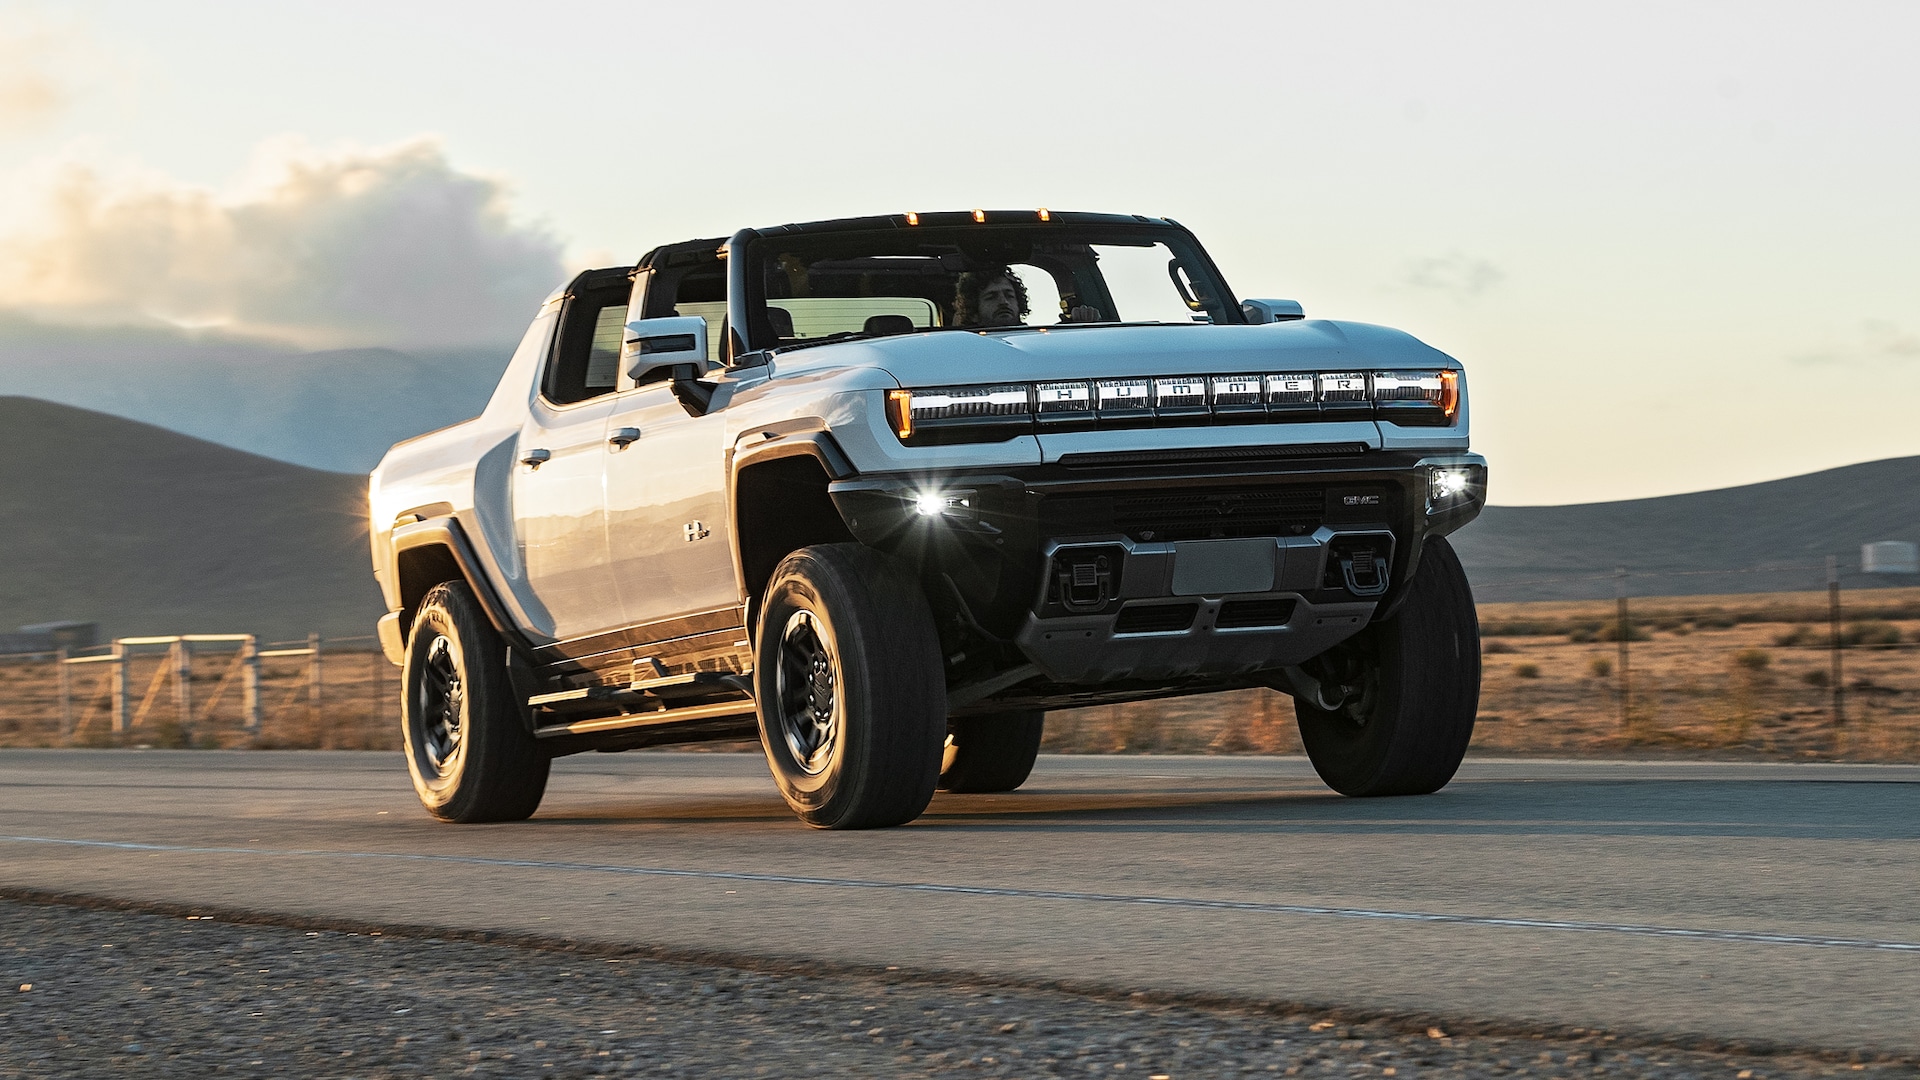 2022 GMC Hummer EV Pickup Pros and Cons Review: Making Its Theatrical Debut